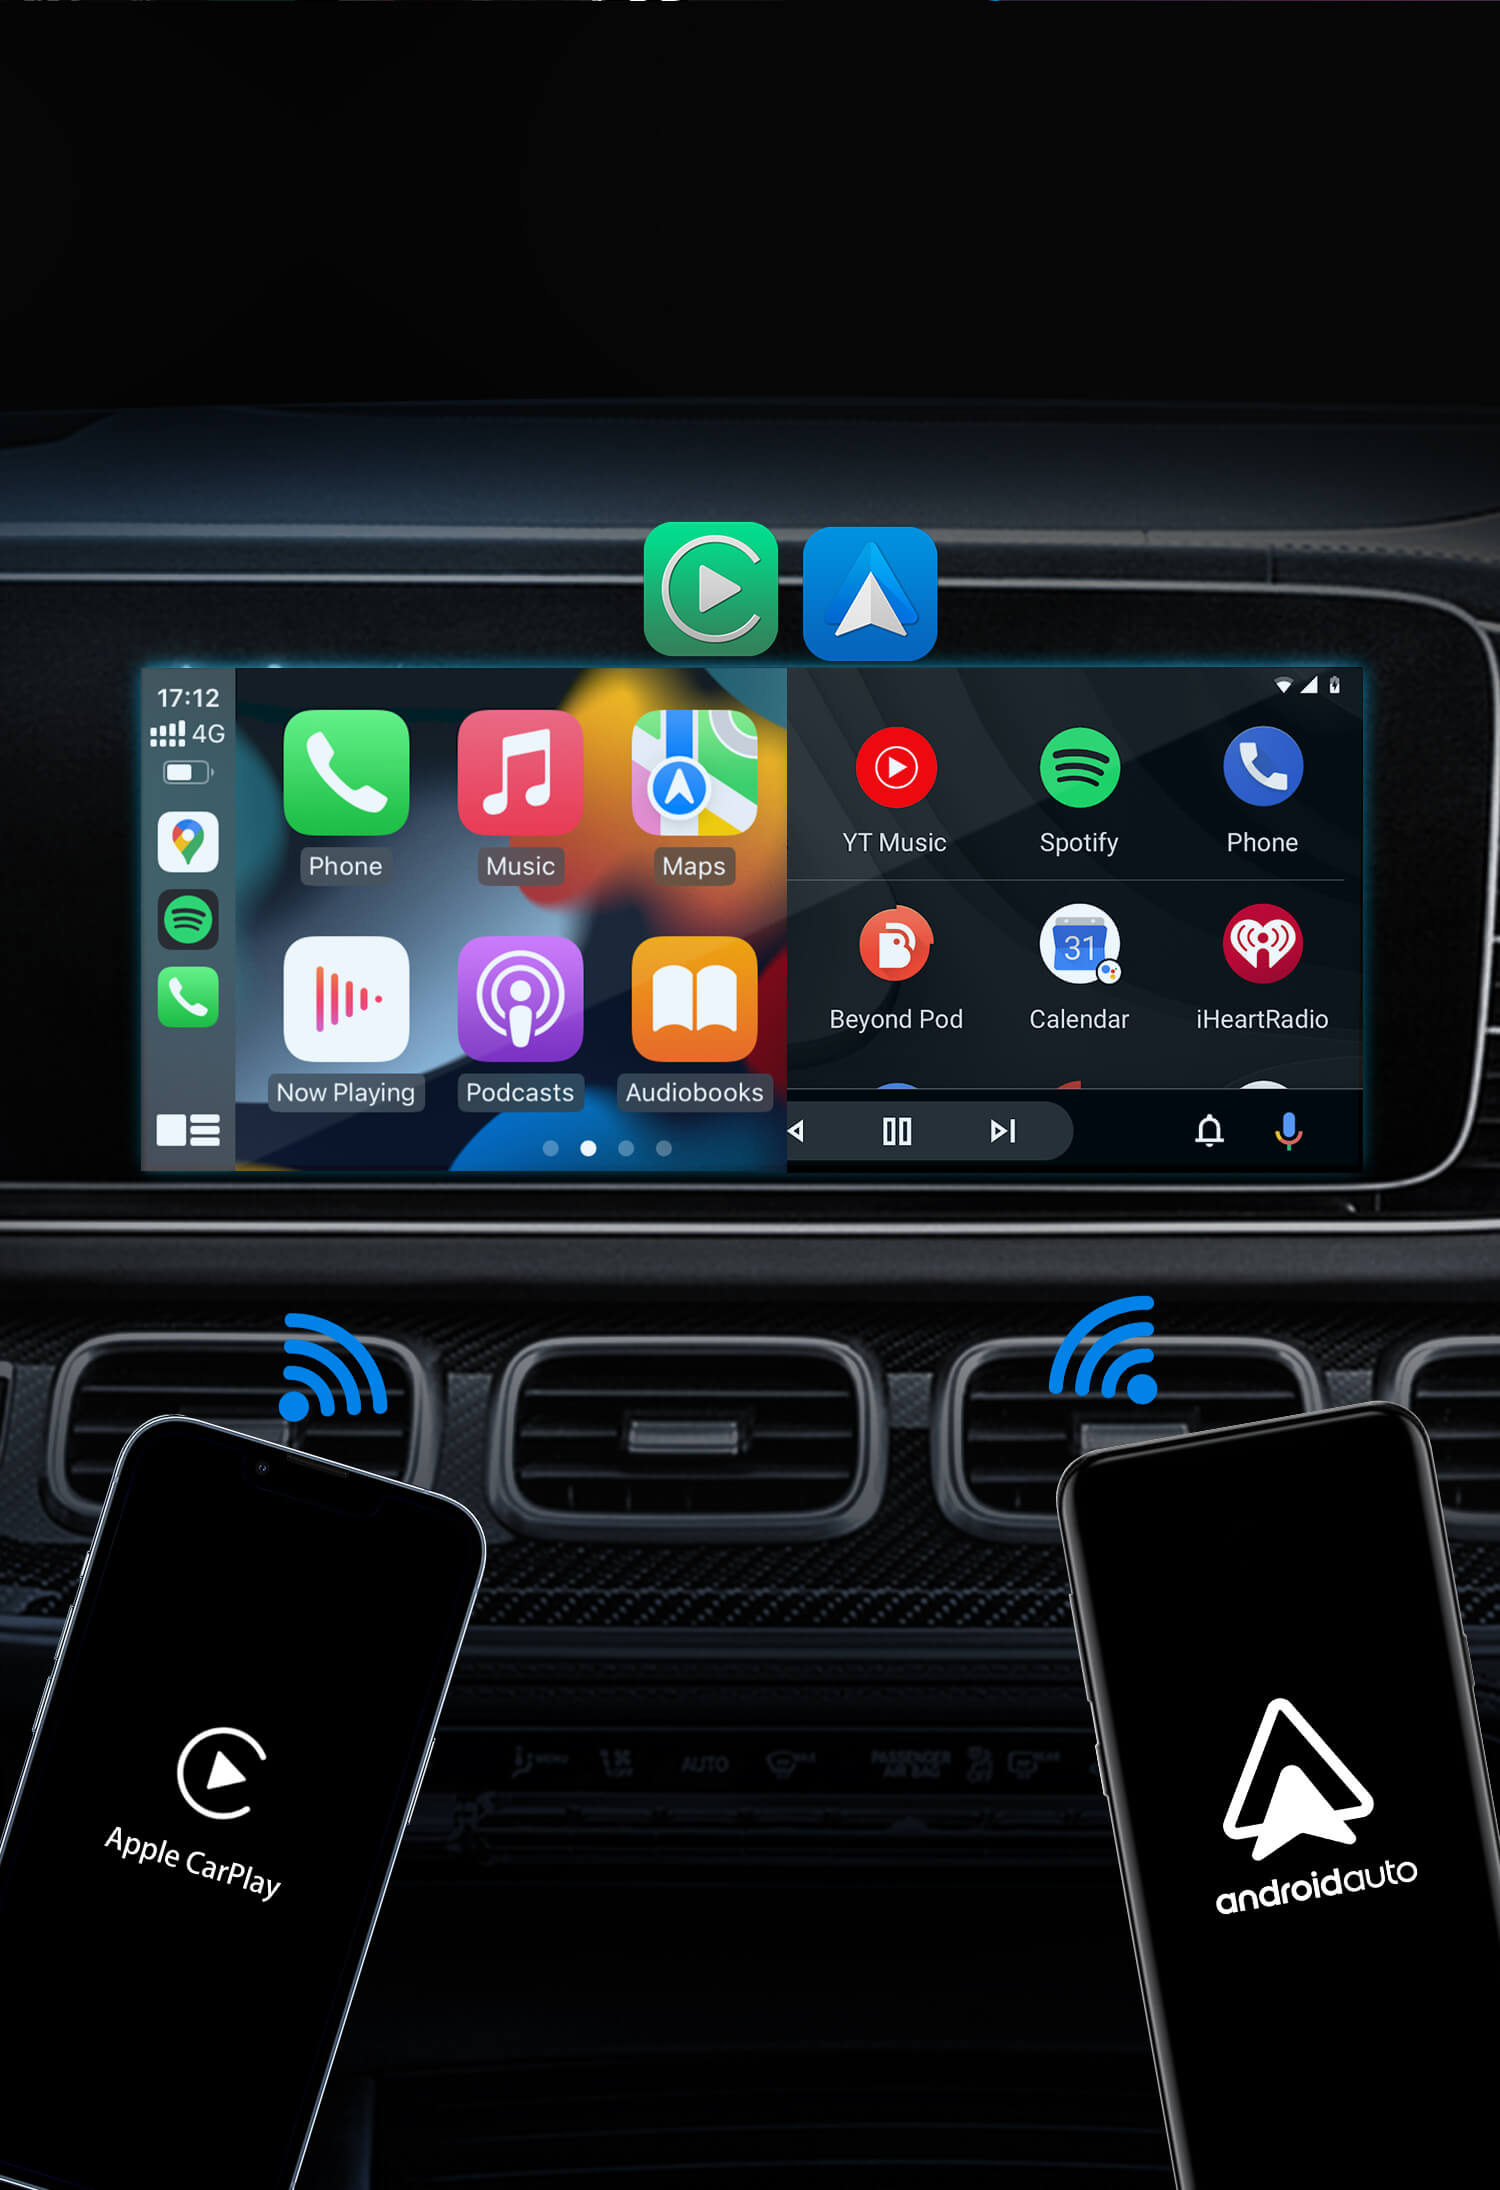 Play2Video Wireless CarPlay/ Android Auto All-in-one Adapter - Ottocast –  OTTOCAST